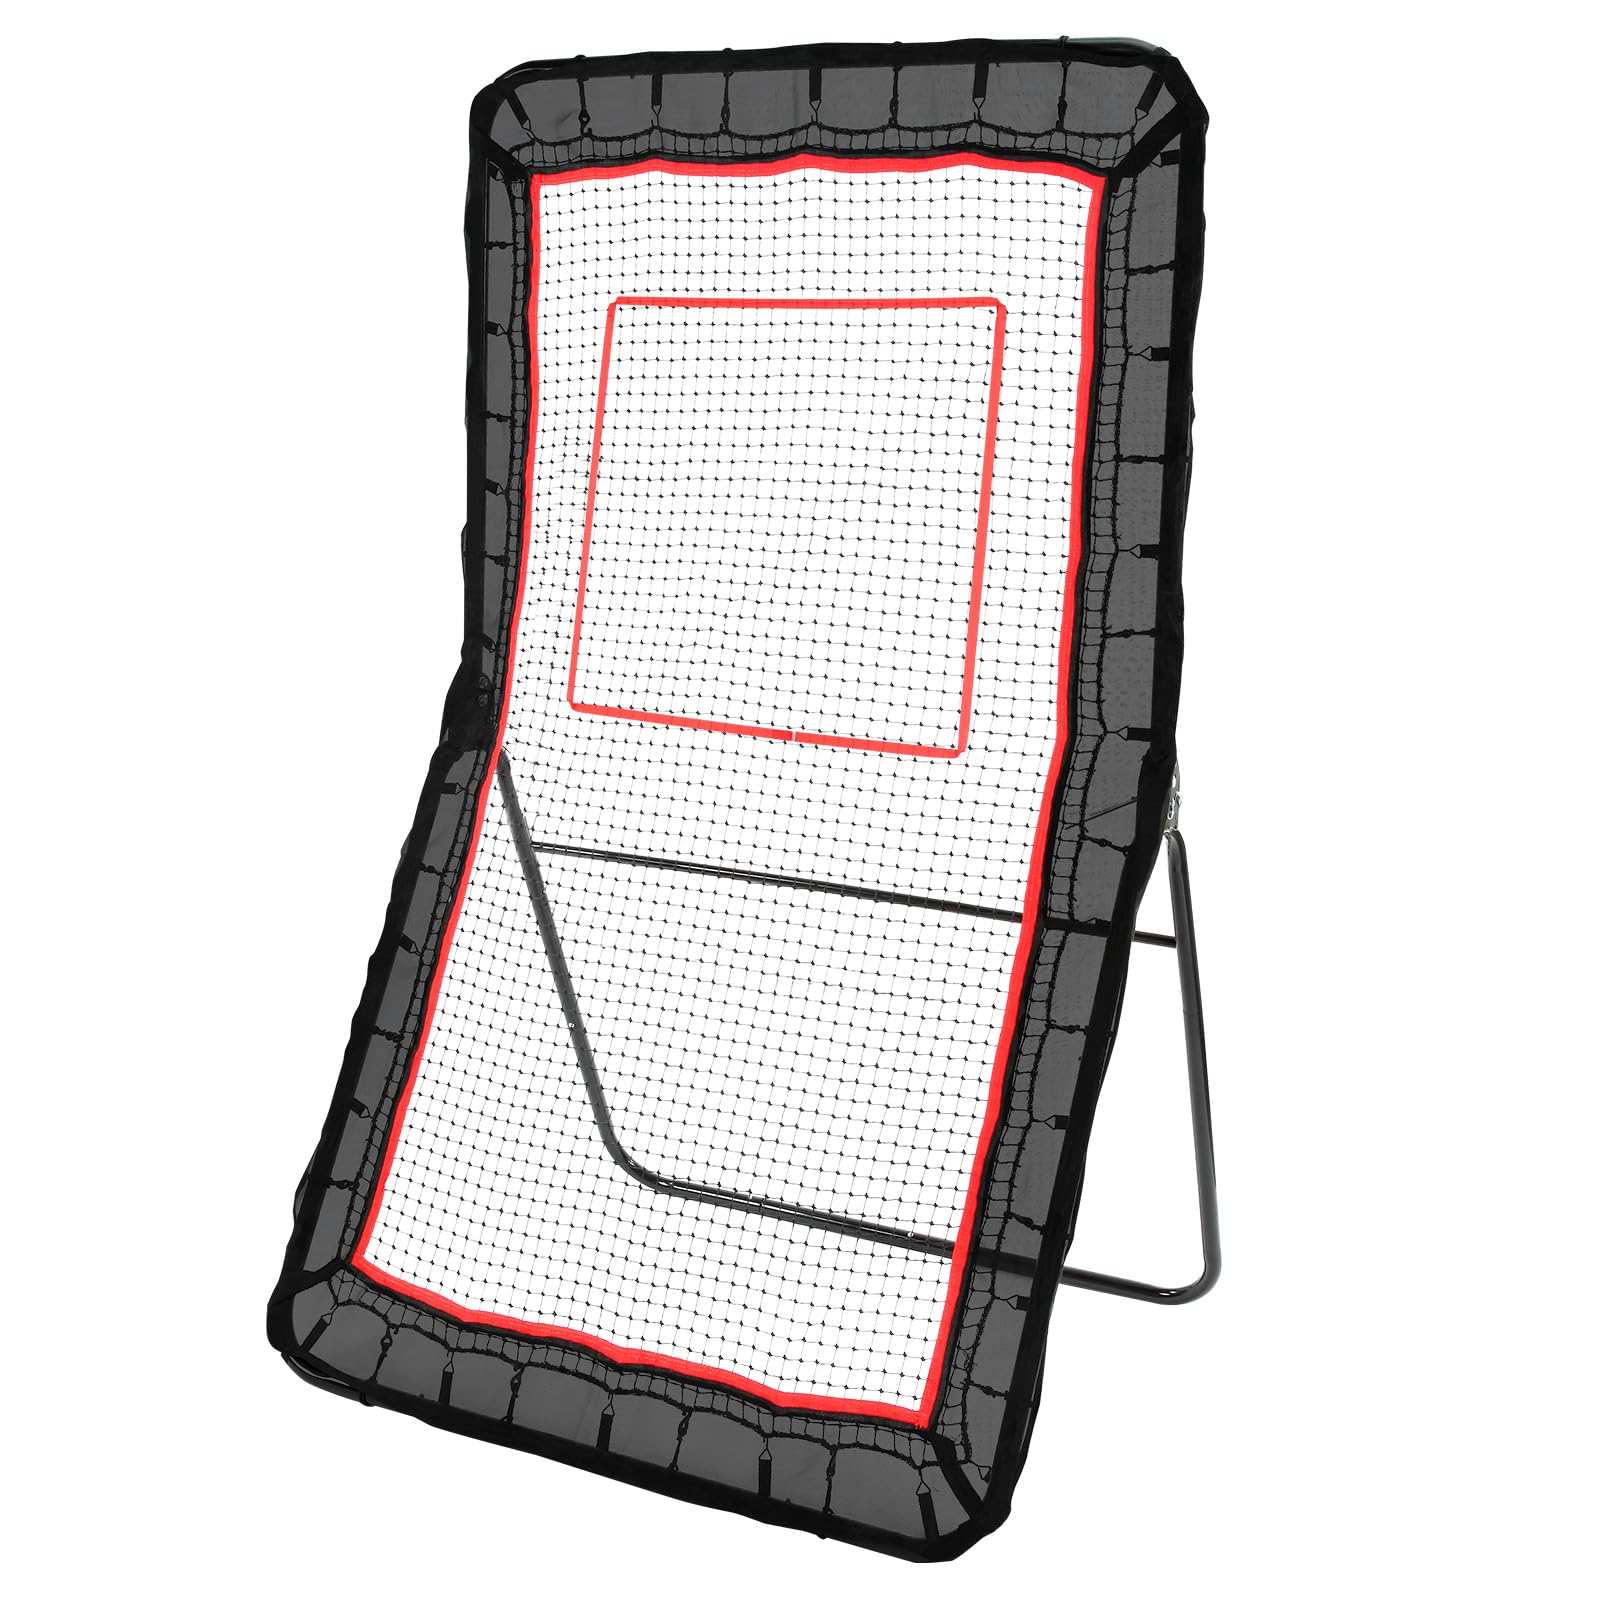 VEVOR Lacrosse Rebounder for Backyard, Volleyball Bounce Back Net, Pitchback Throwback Baseball Softball Return Training Screen, Adjustable Angle Shooting Practice Training Wall with Target